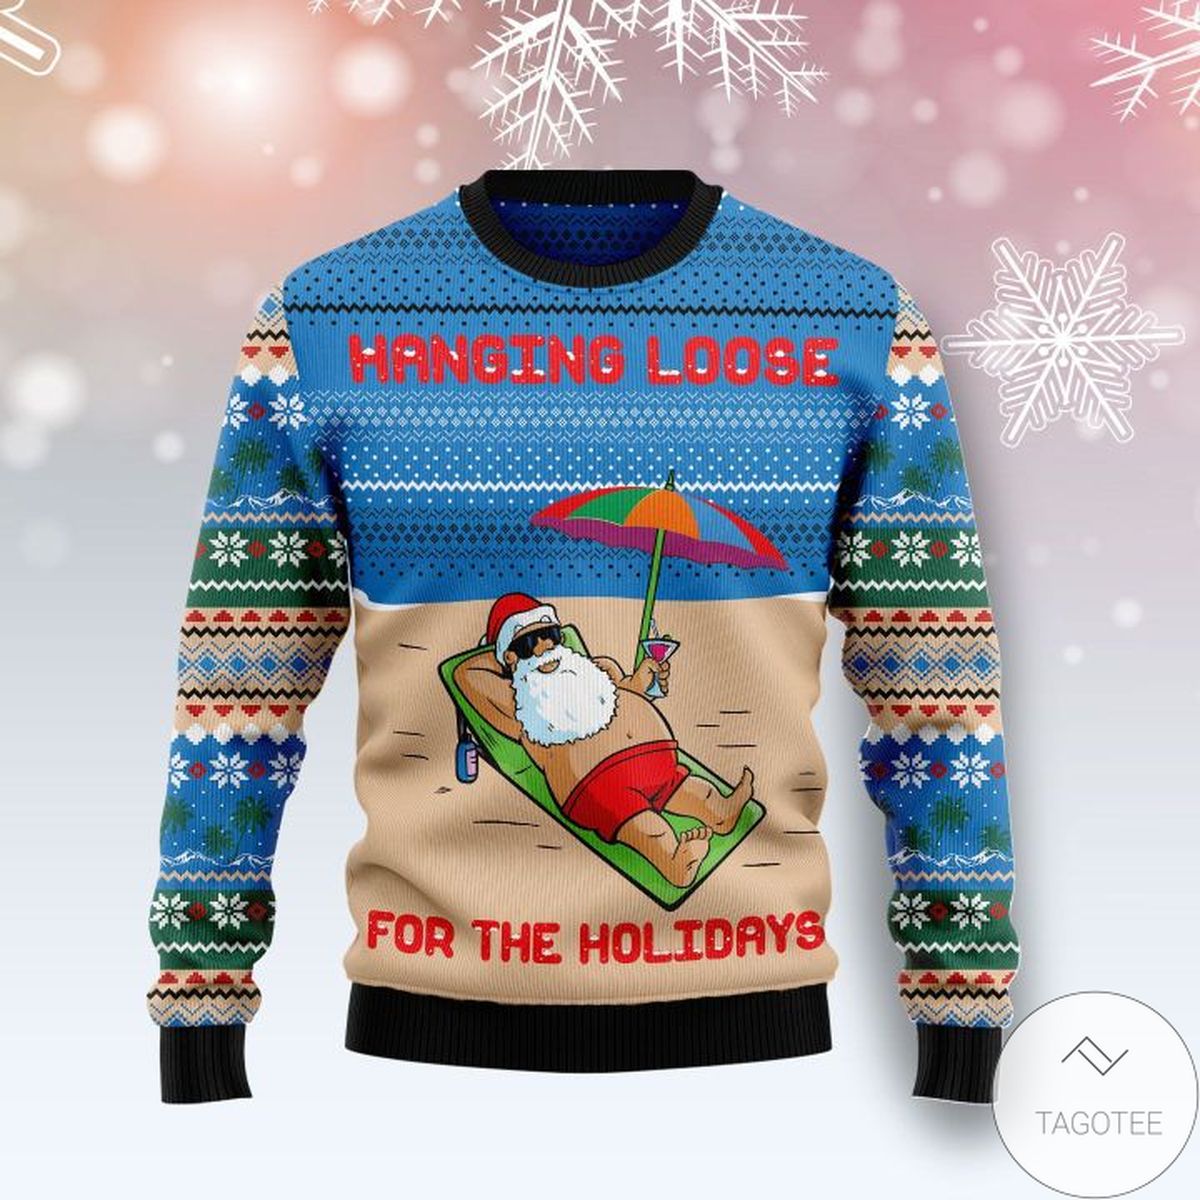 Santa Claus Hanging Loose For The Holidays Ugly Christmas Sweater